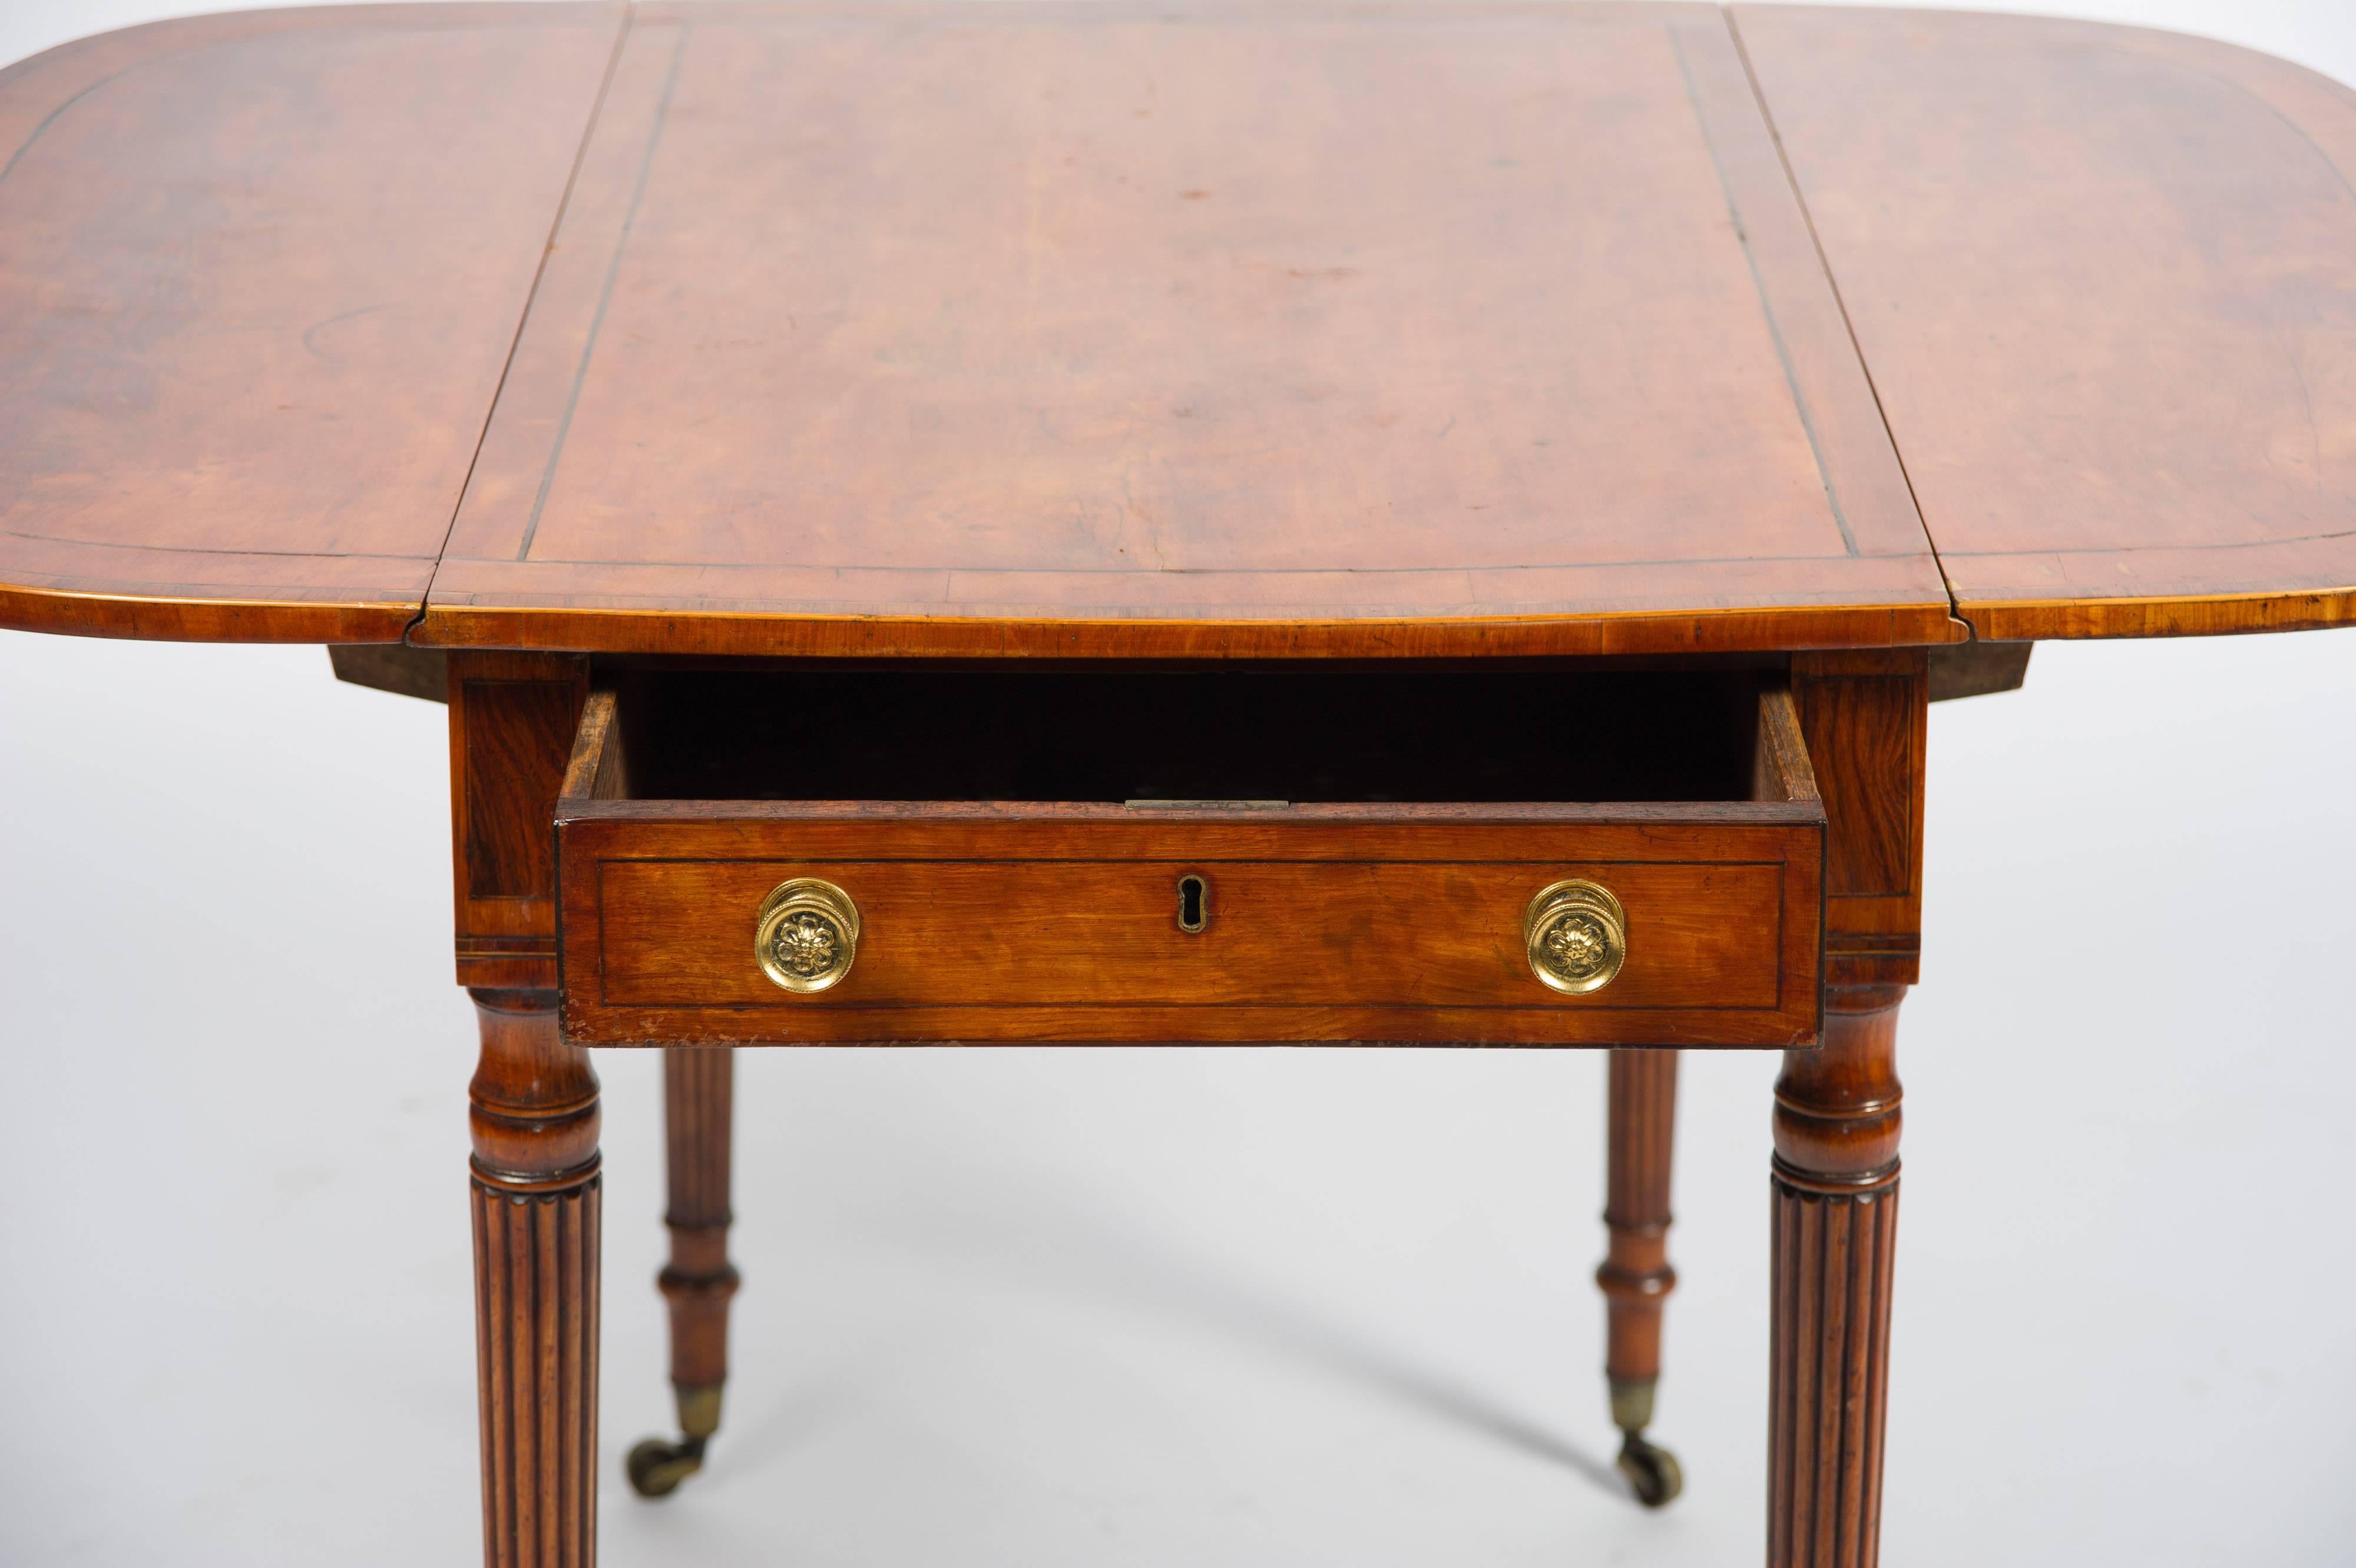 19th Century Gillows Influenced Satinwood Pembroke Table